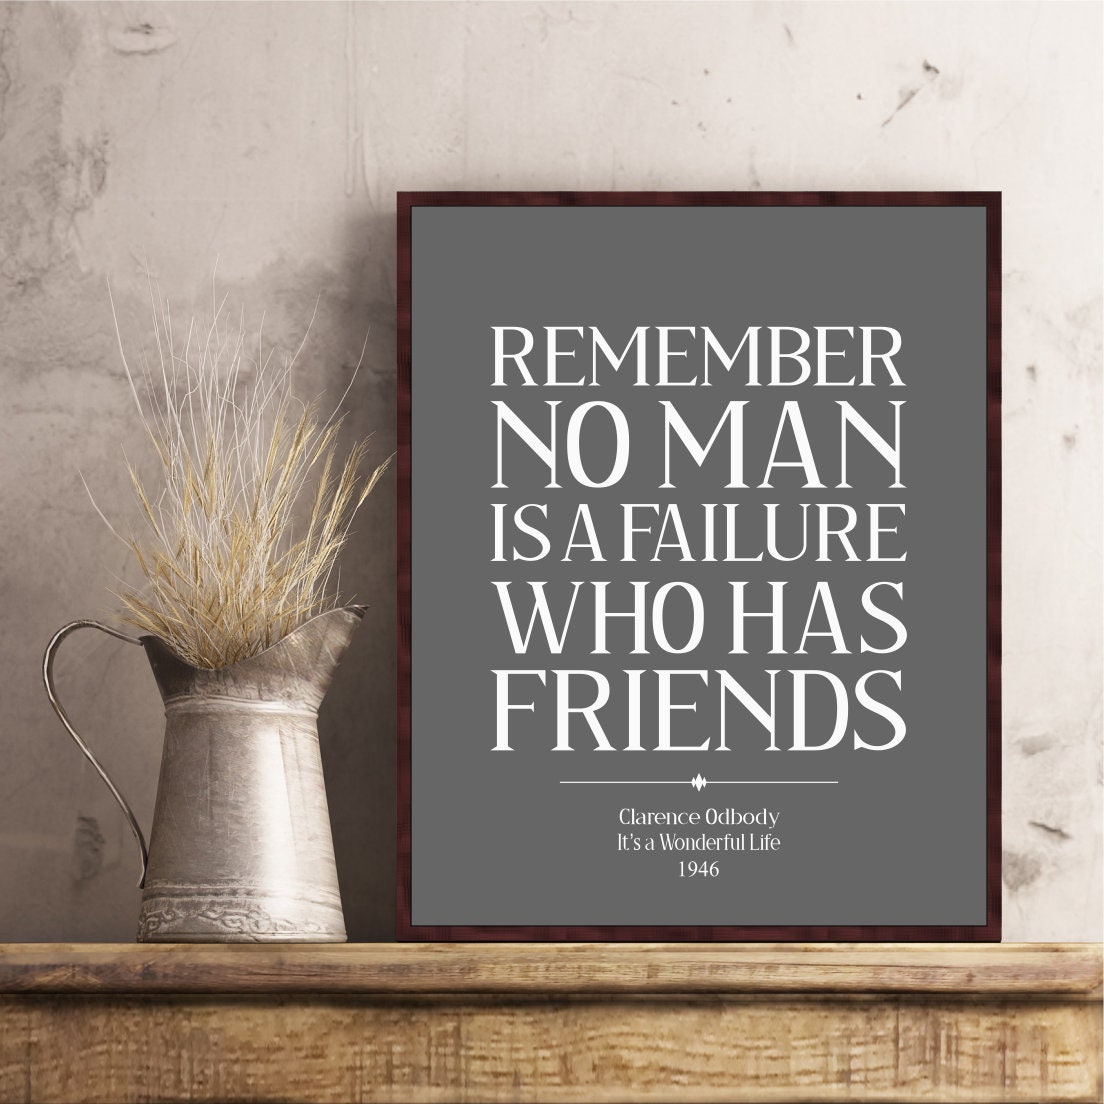 It's a Wonderful Life quote poster Clarence Odbody Remember no man is a failure who has friends George Bailey classic movie wall art decor